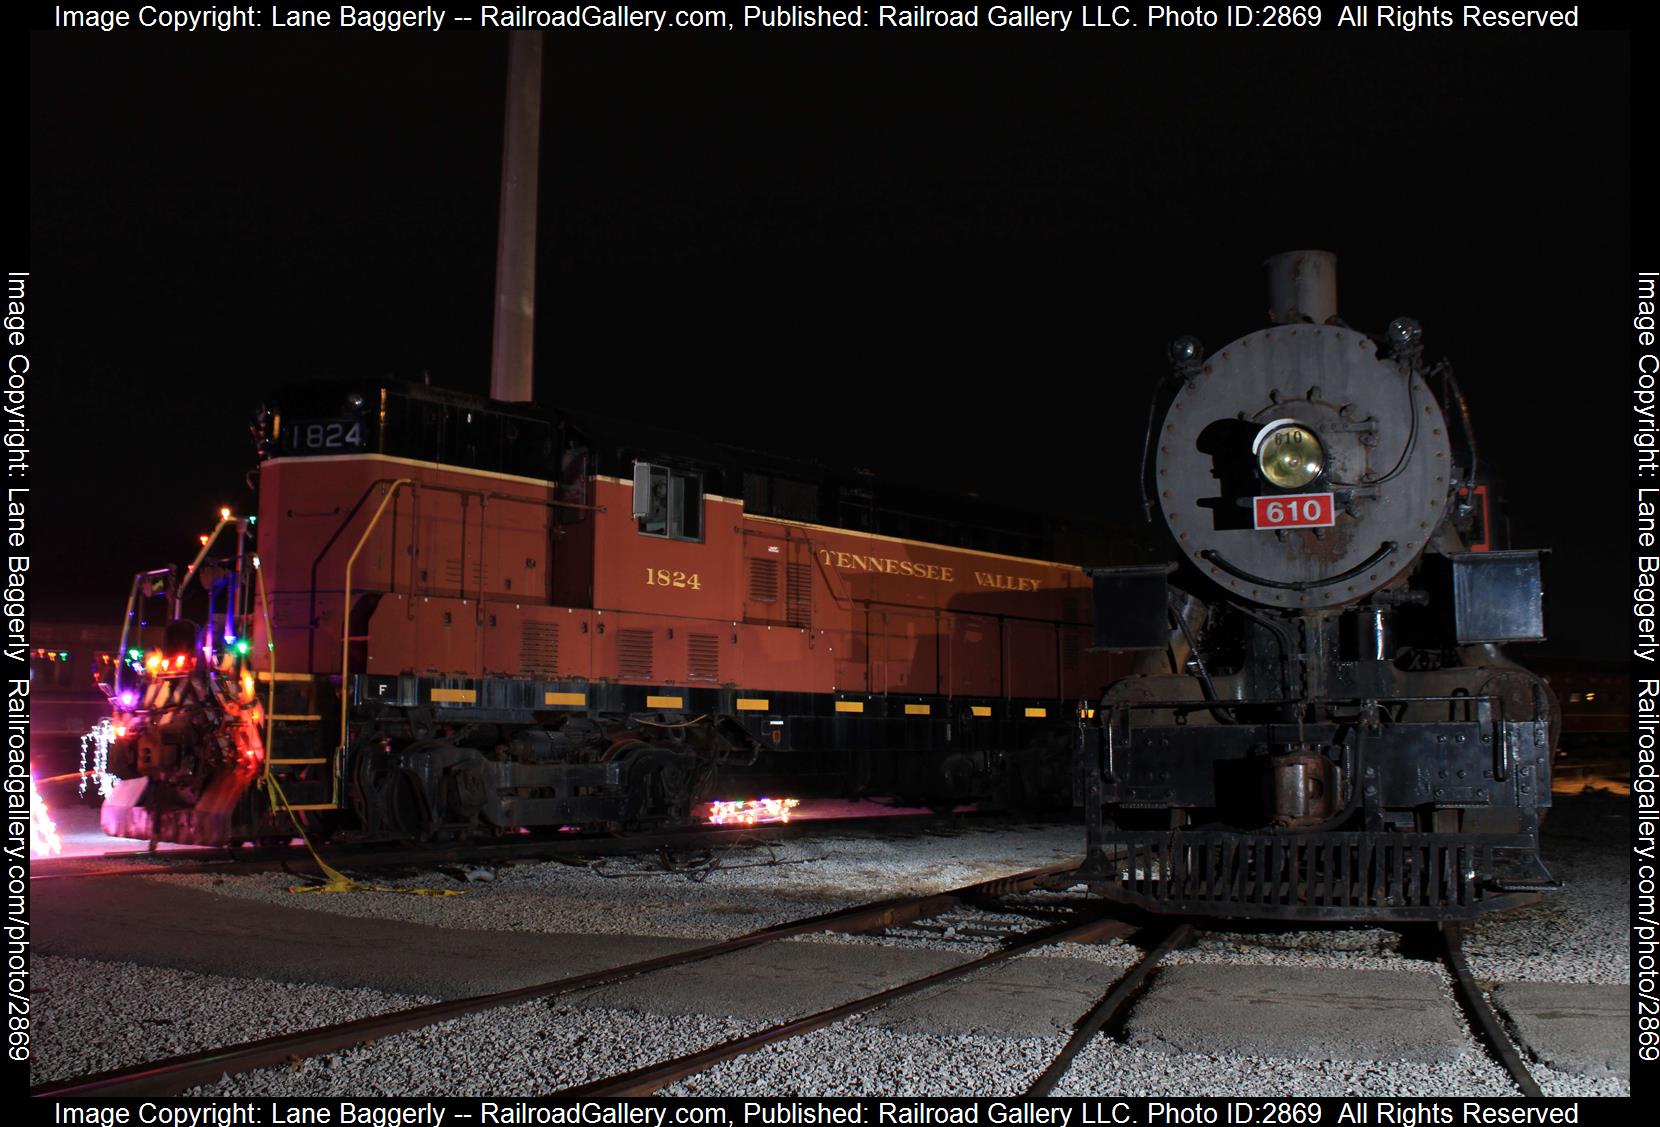 TVRM 610, TVRM 1824 is a class S160a, GP7 and  is pictured in Chattanooga , Tennessee, United States.  This was taken along the TVRM on the Tennessee Valley. Photo Copyright: Lane Baggerly uploaded to Railroad Gallery on 01/05/2024. This photograph of TVRM 610, TVRM 1824 was taken on Thursday, January 04, 2024. All Rights Reserved. 